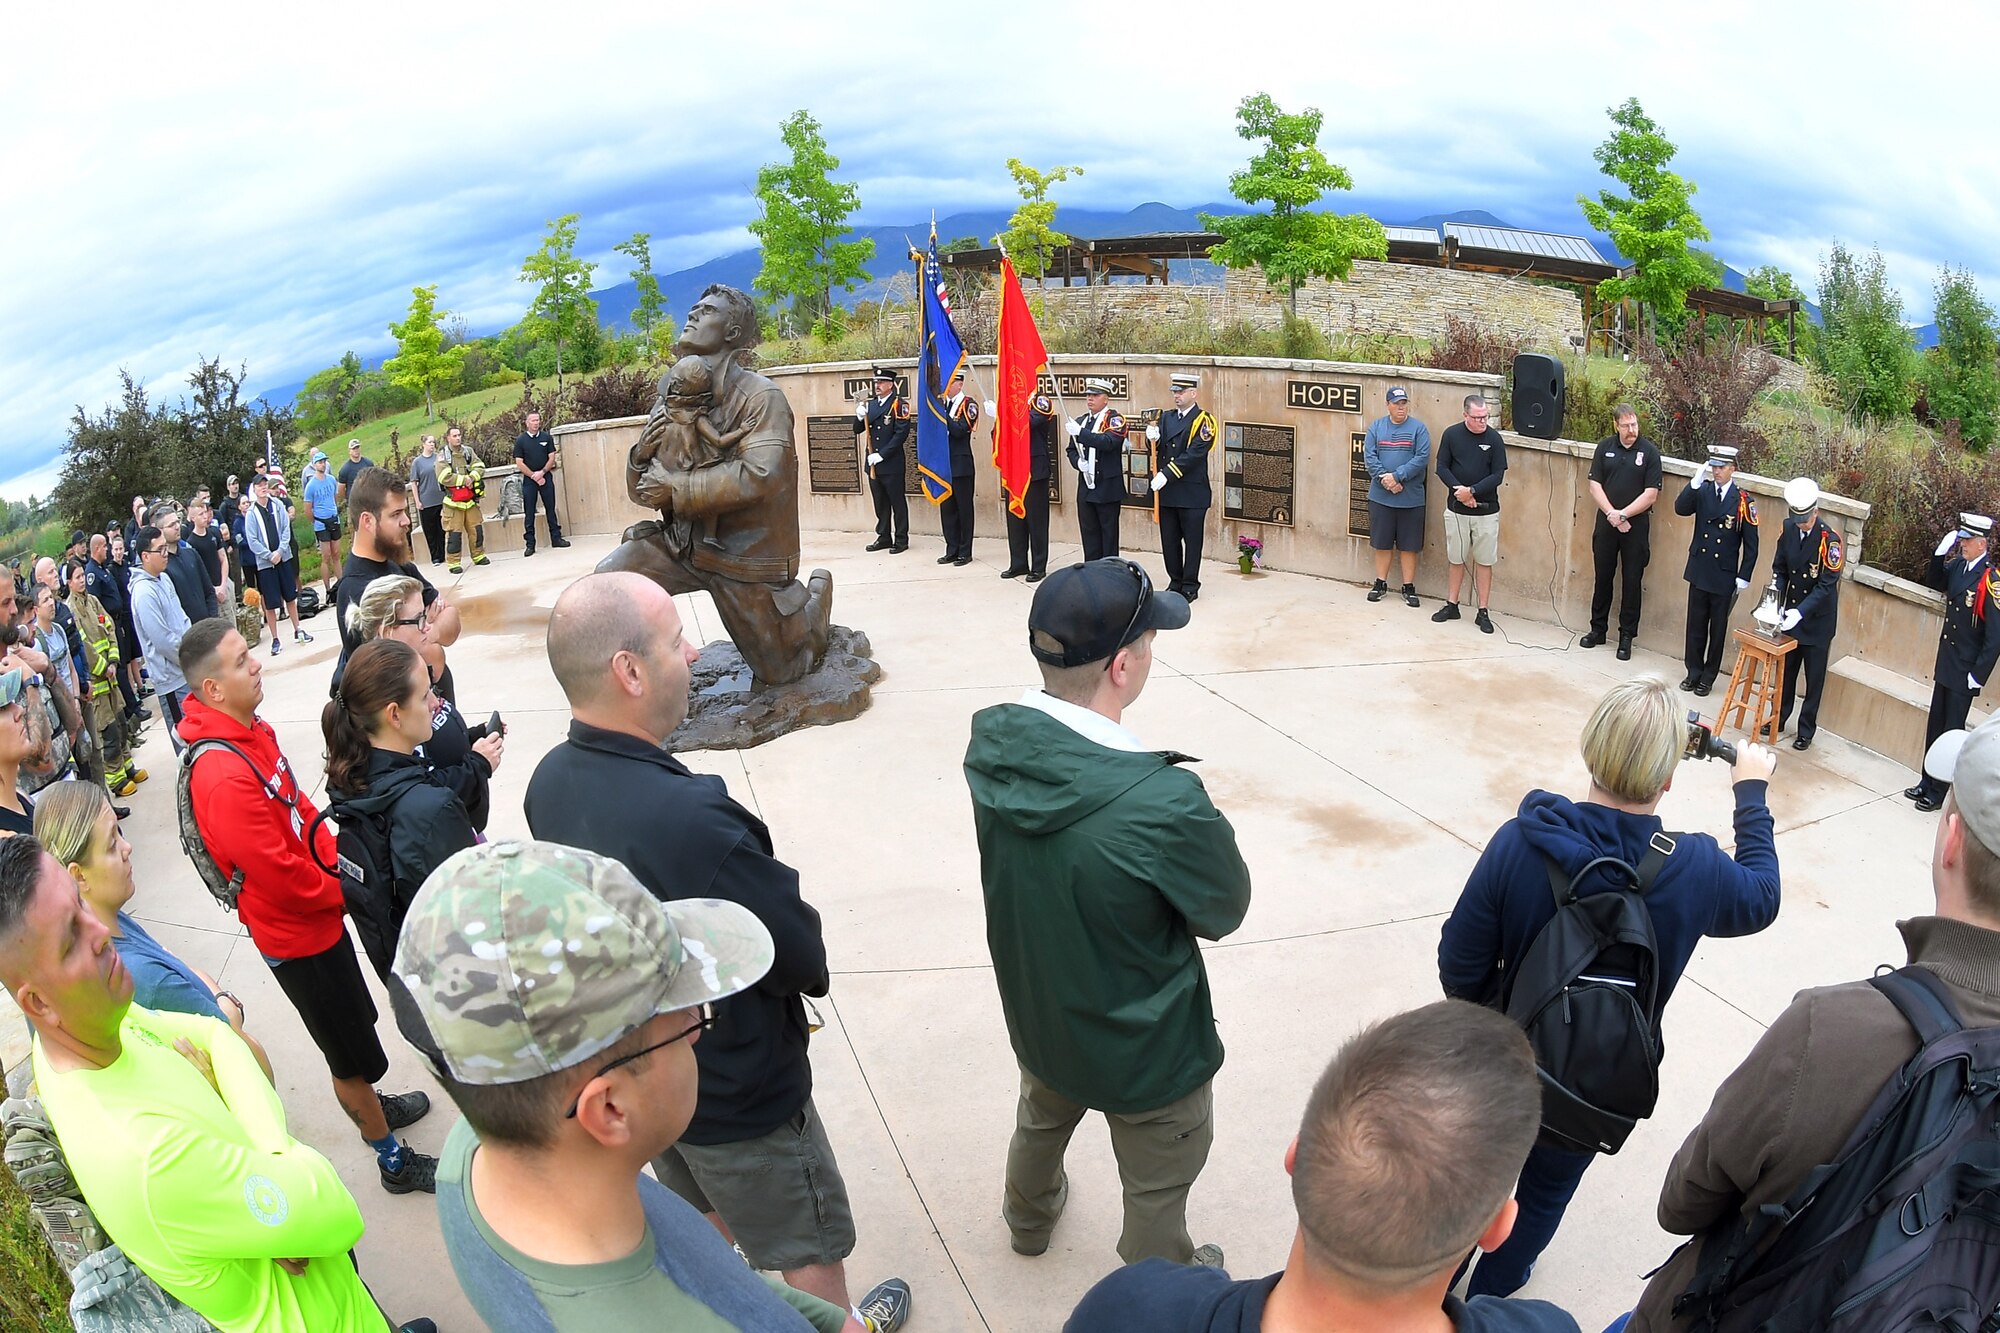 Participants listen to the ringing of the bell, during the opening ceremony of the 9/11 Memorial Ruck March, at the Utah State University Botanical Gardens in Kaysville, Utah, Sept. 11, 2019. The event was co-sponsored by Hill Air Force Base first responders and fire and police departments from Kaysville and Layton, to honor and remember the fallen from the events of Sept. 11, 2001. (U.S. Air Force photo by Todd Cromar)